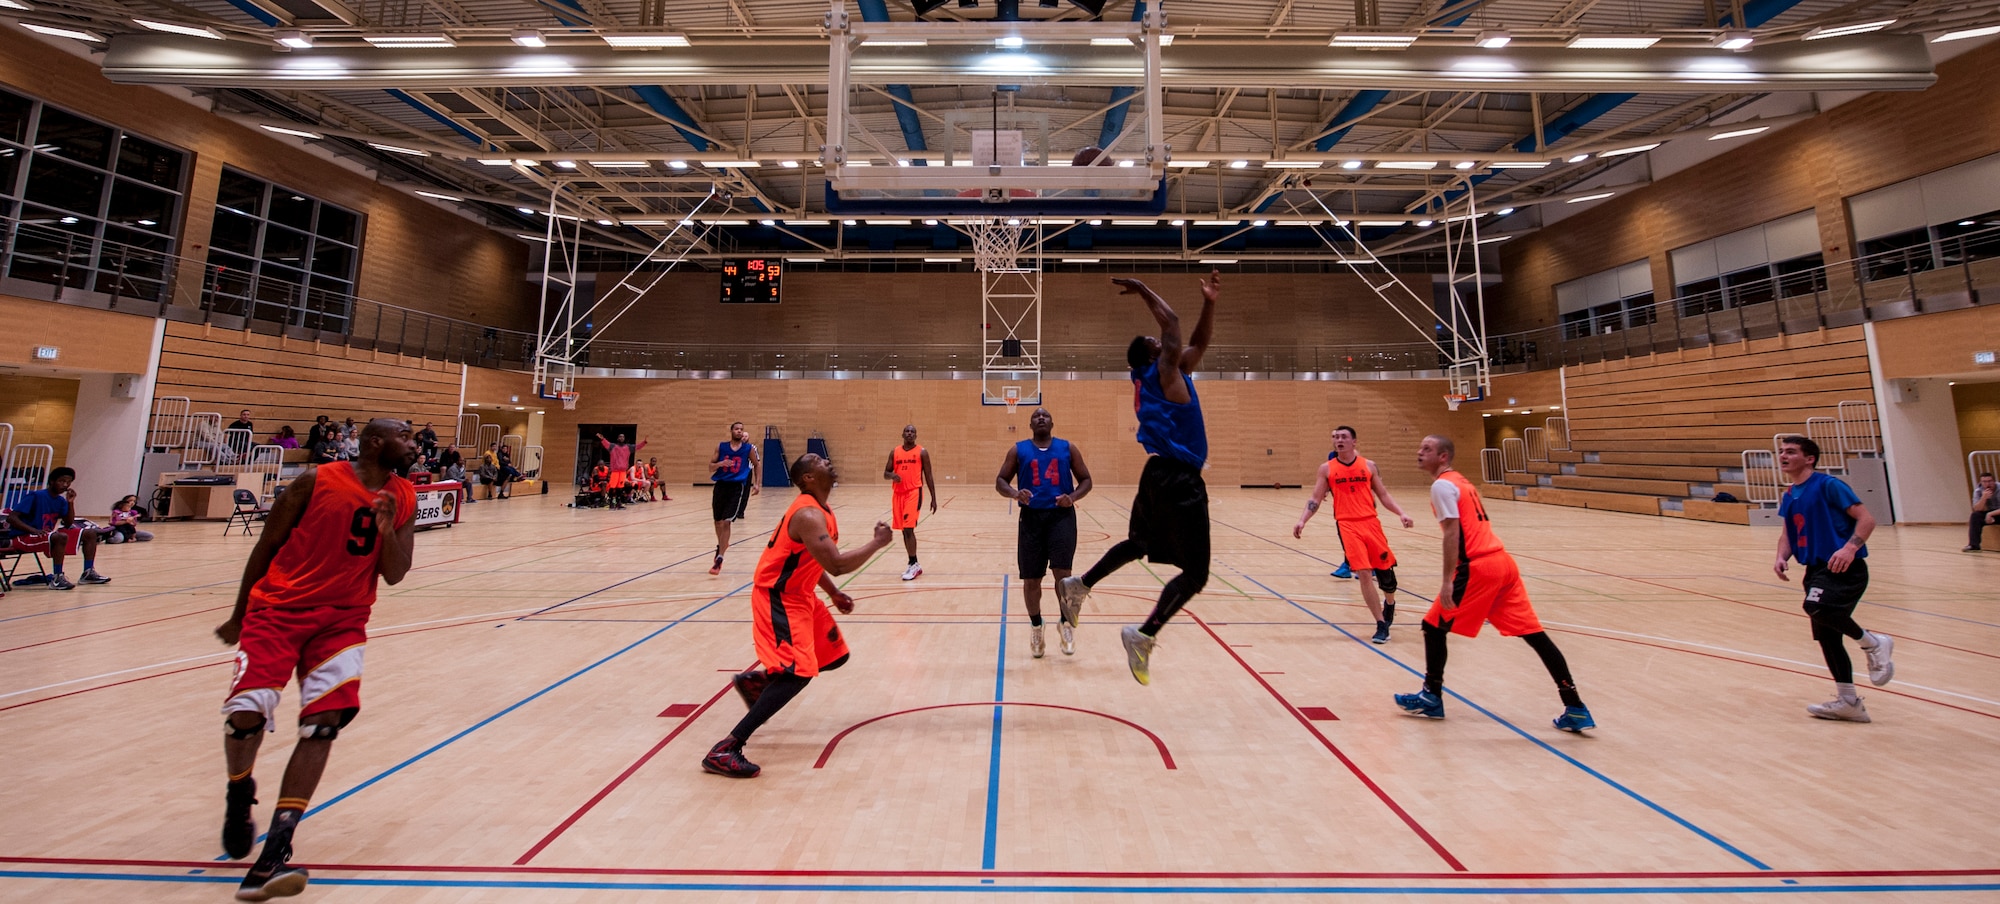 The 52nd Logistics Readiness Squadron and 52nd Maintenance Group intramural basketball teams play in the Intramural Championship game Jan. 28, 2016, at Spangdahlem Air Base, Germany. The two teams battled to be called champions and, ultimately the 52nd Logistics Readiness Squadron won the game 54-52. (U.S. Air Force photo by Senior Airman Rusty Frank/Released)